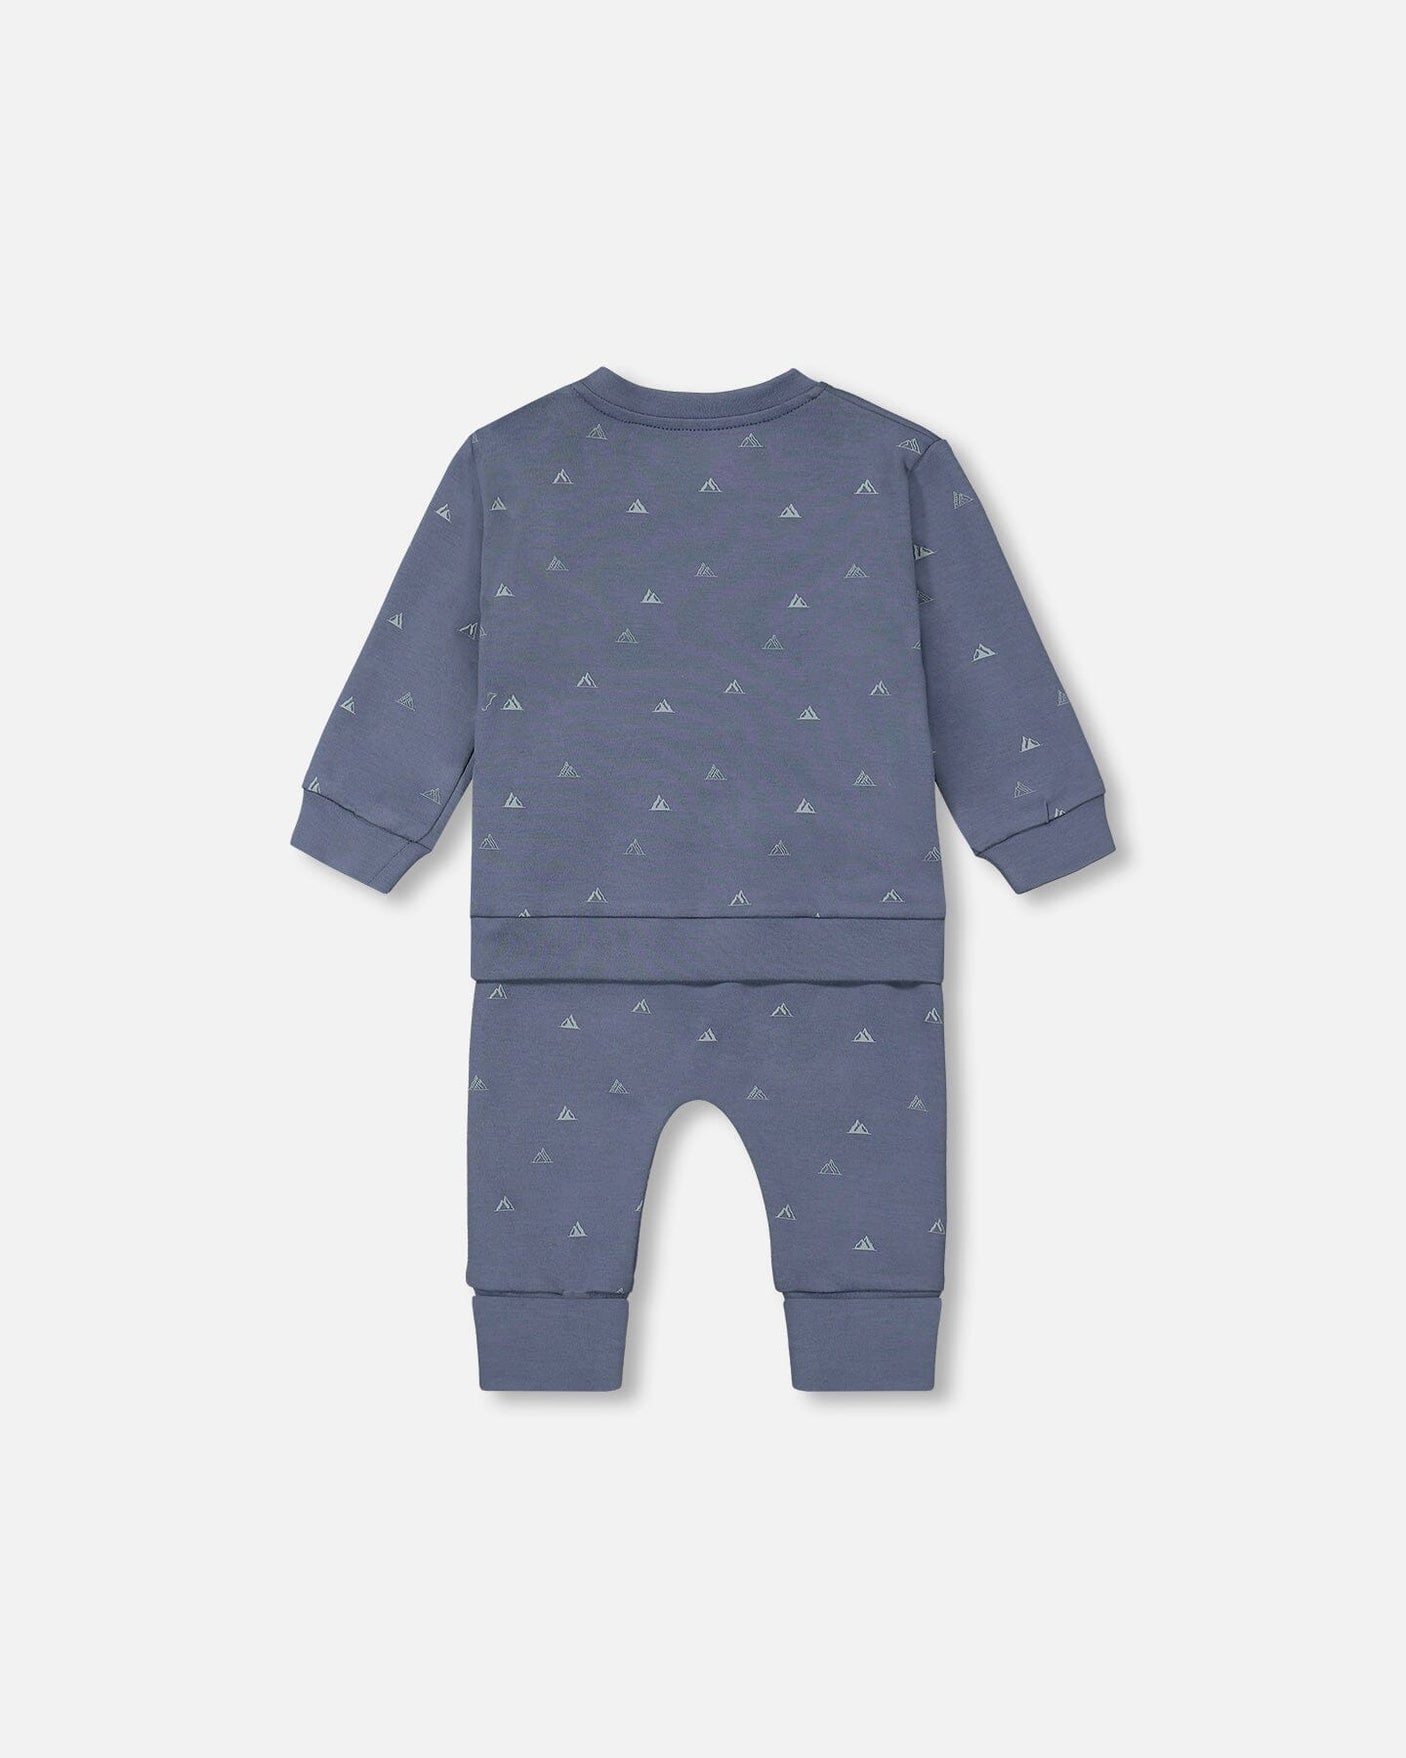 Organic Cotton Printed Top And Grow-With-Me Pants Set French Navy Little Mountains-3